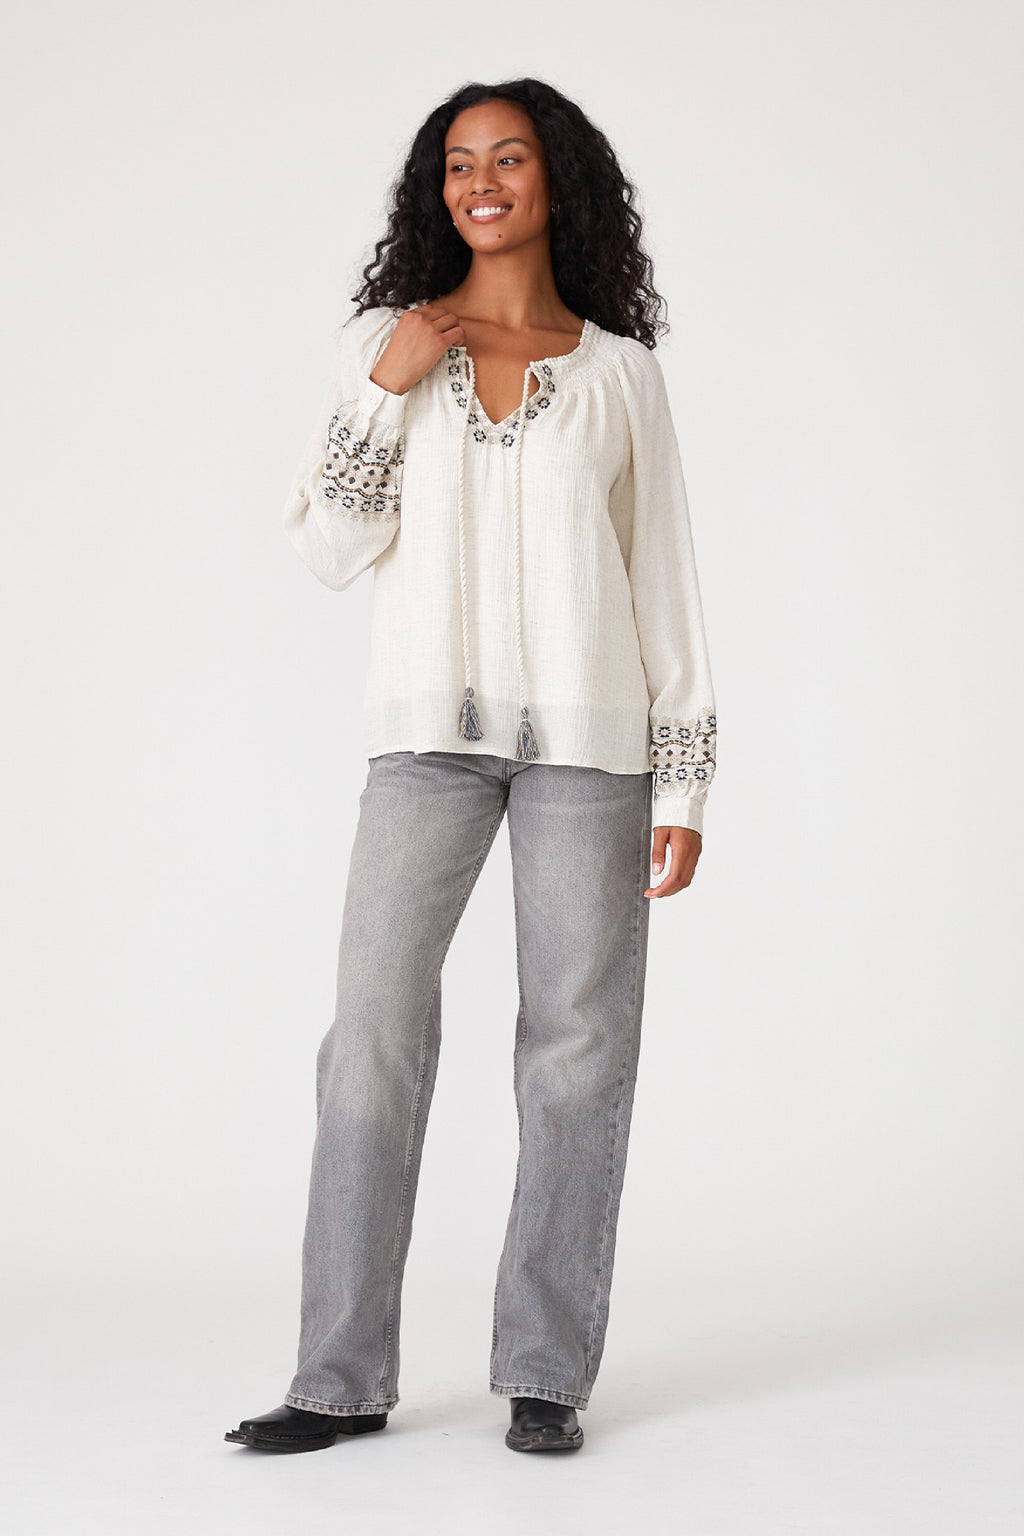 Alex Long Embroidered Floral Sleeve Top White